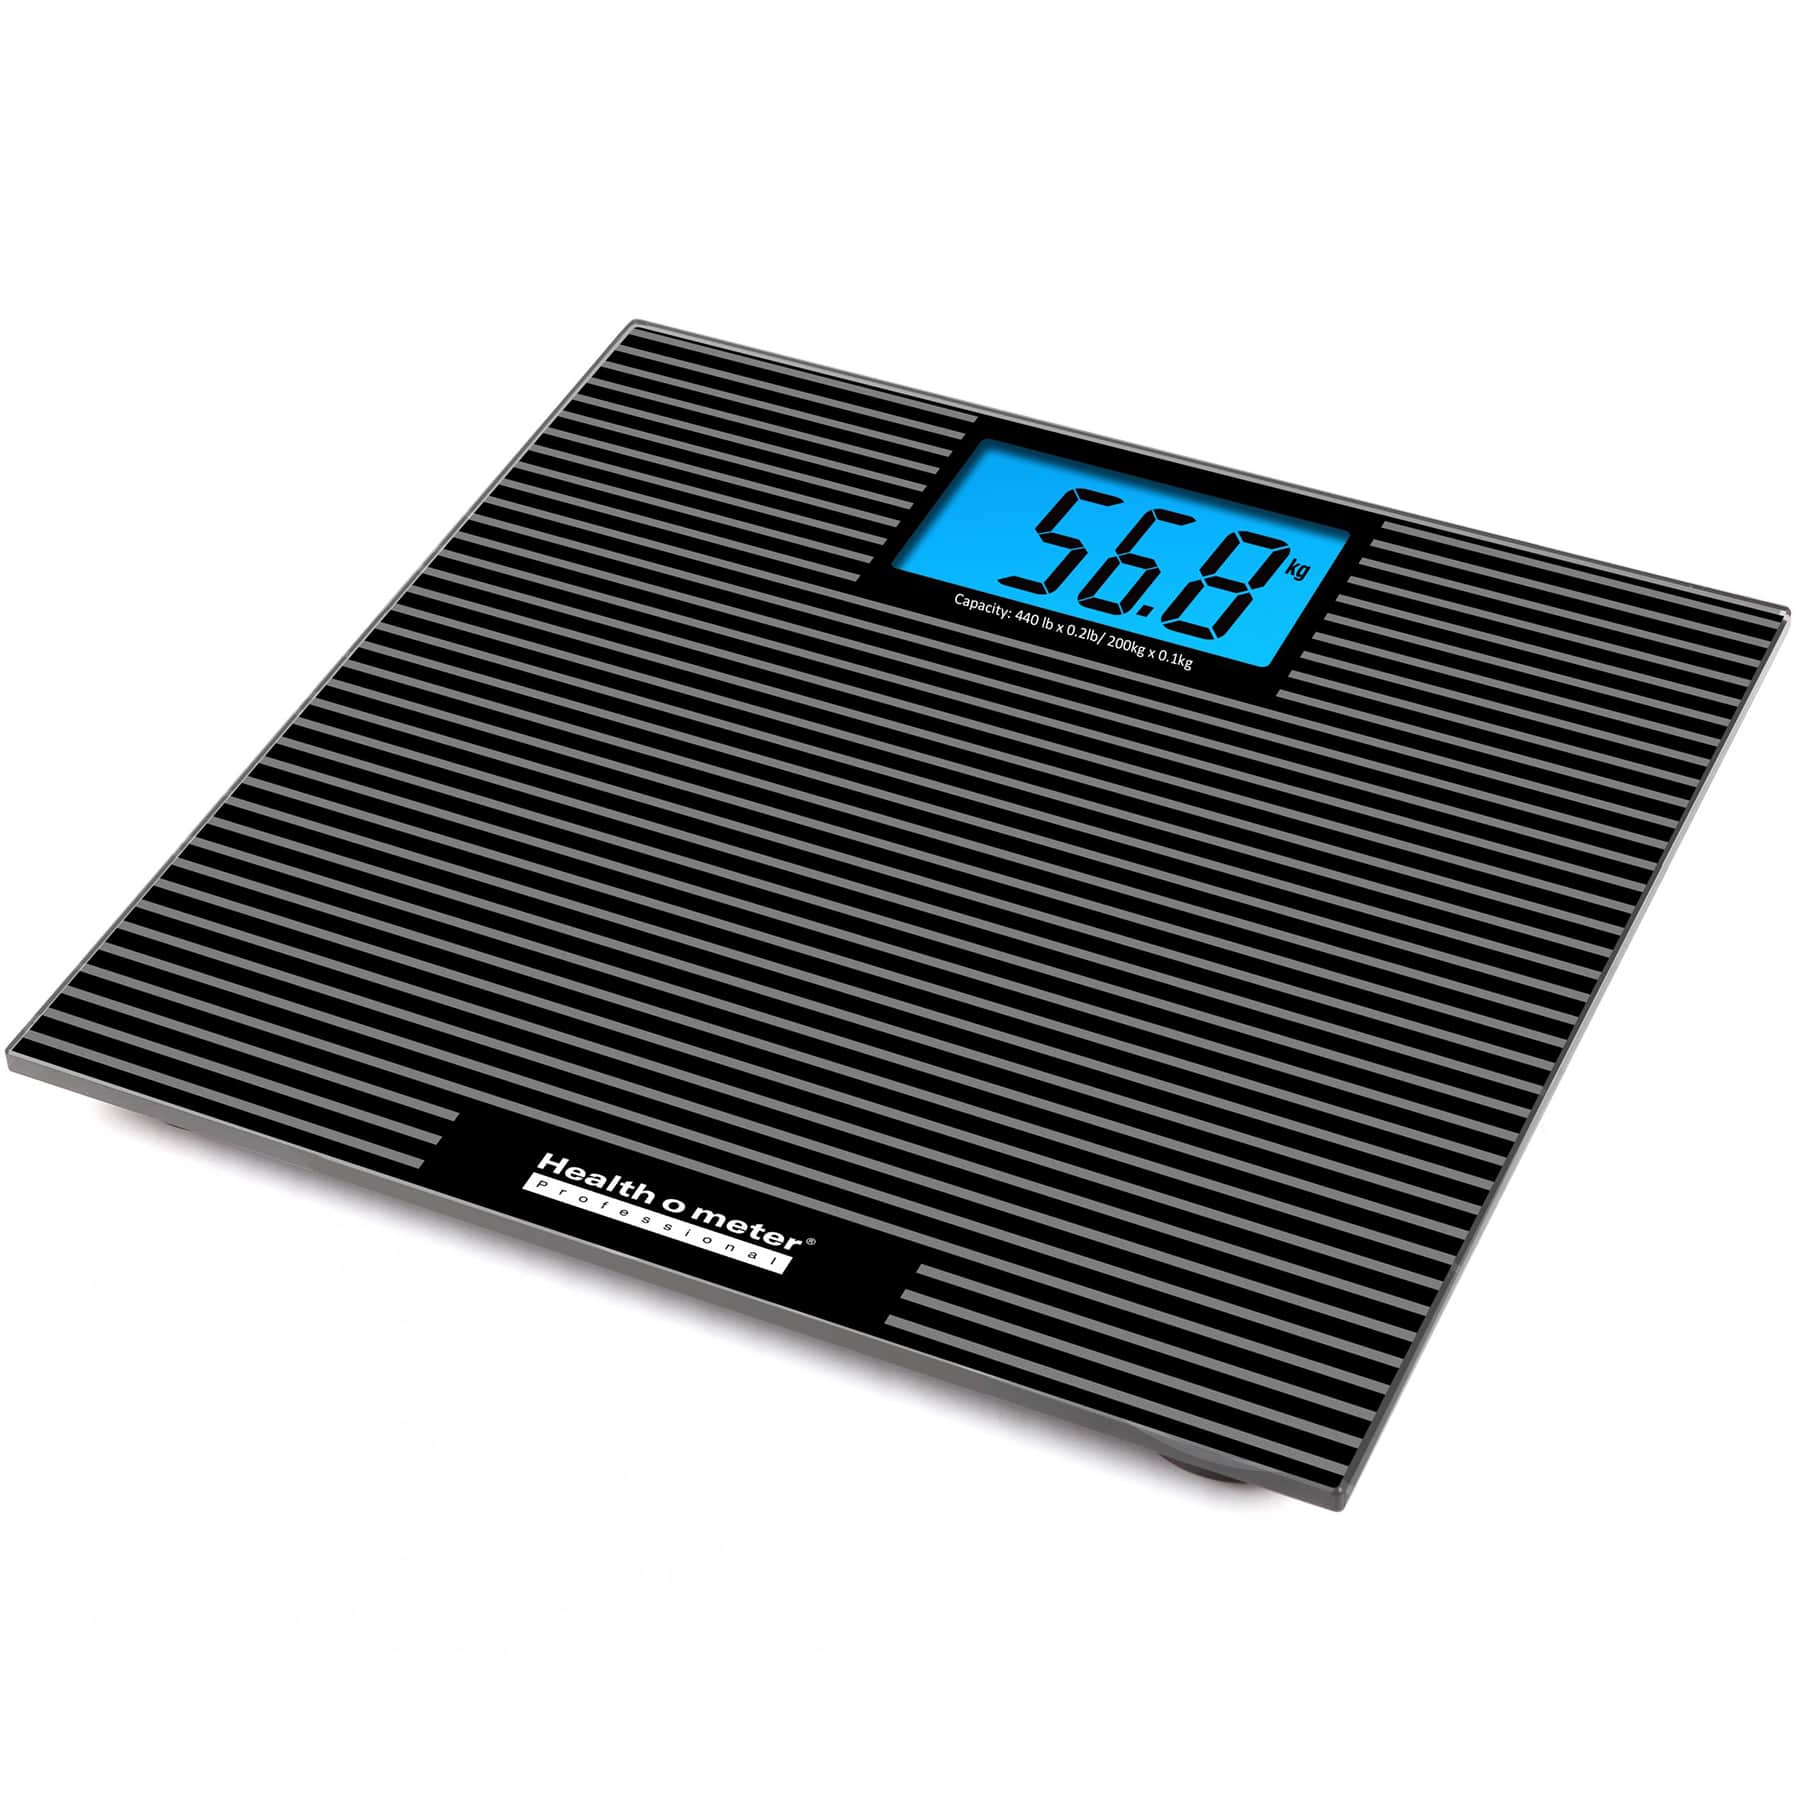 Health o meter 810KL Digital Glass Scale with Anti-Slip Tread and Backlight